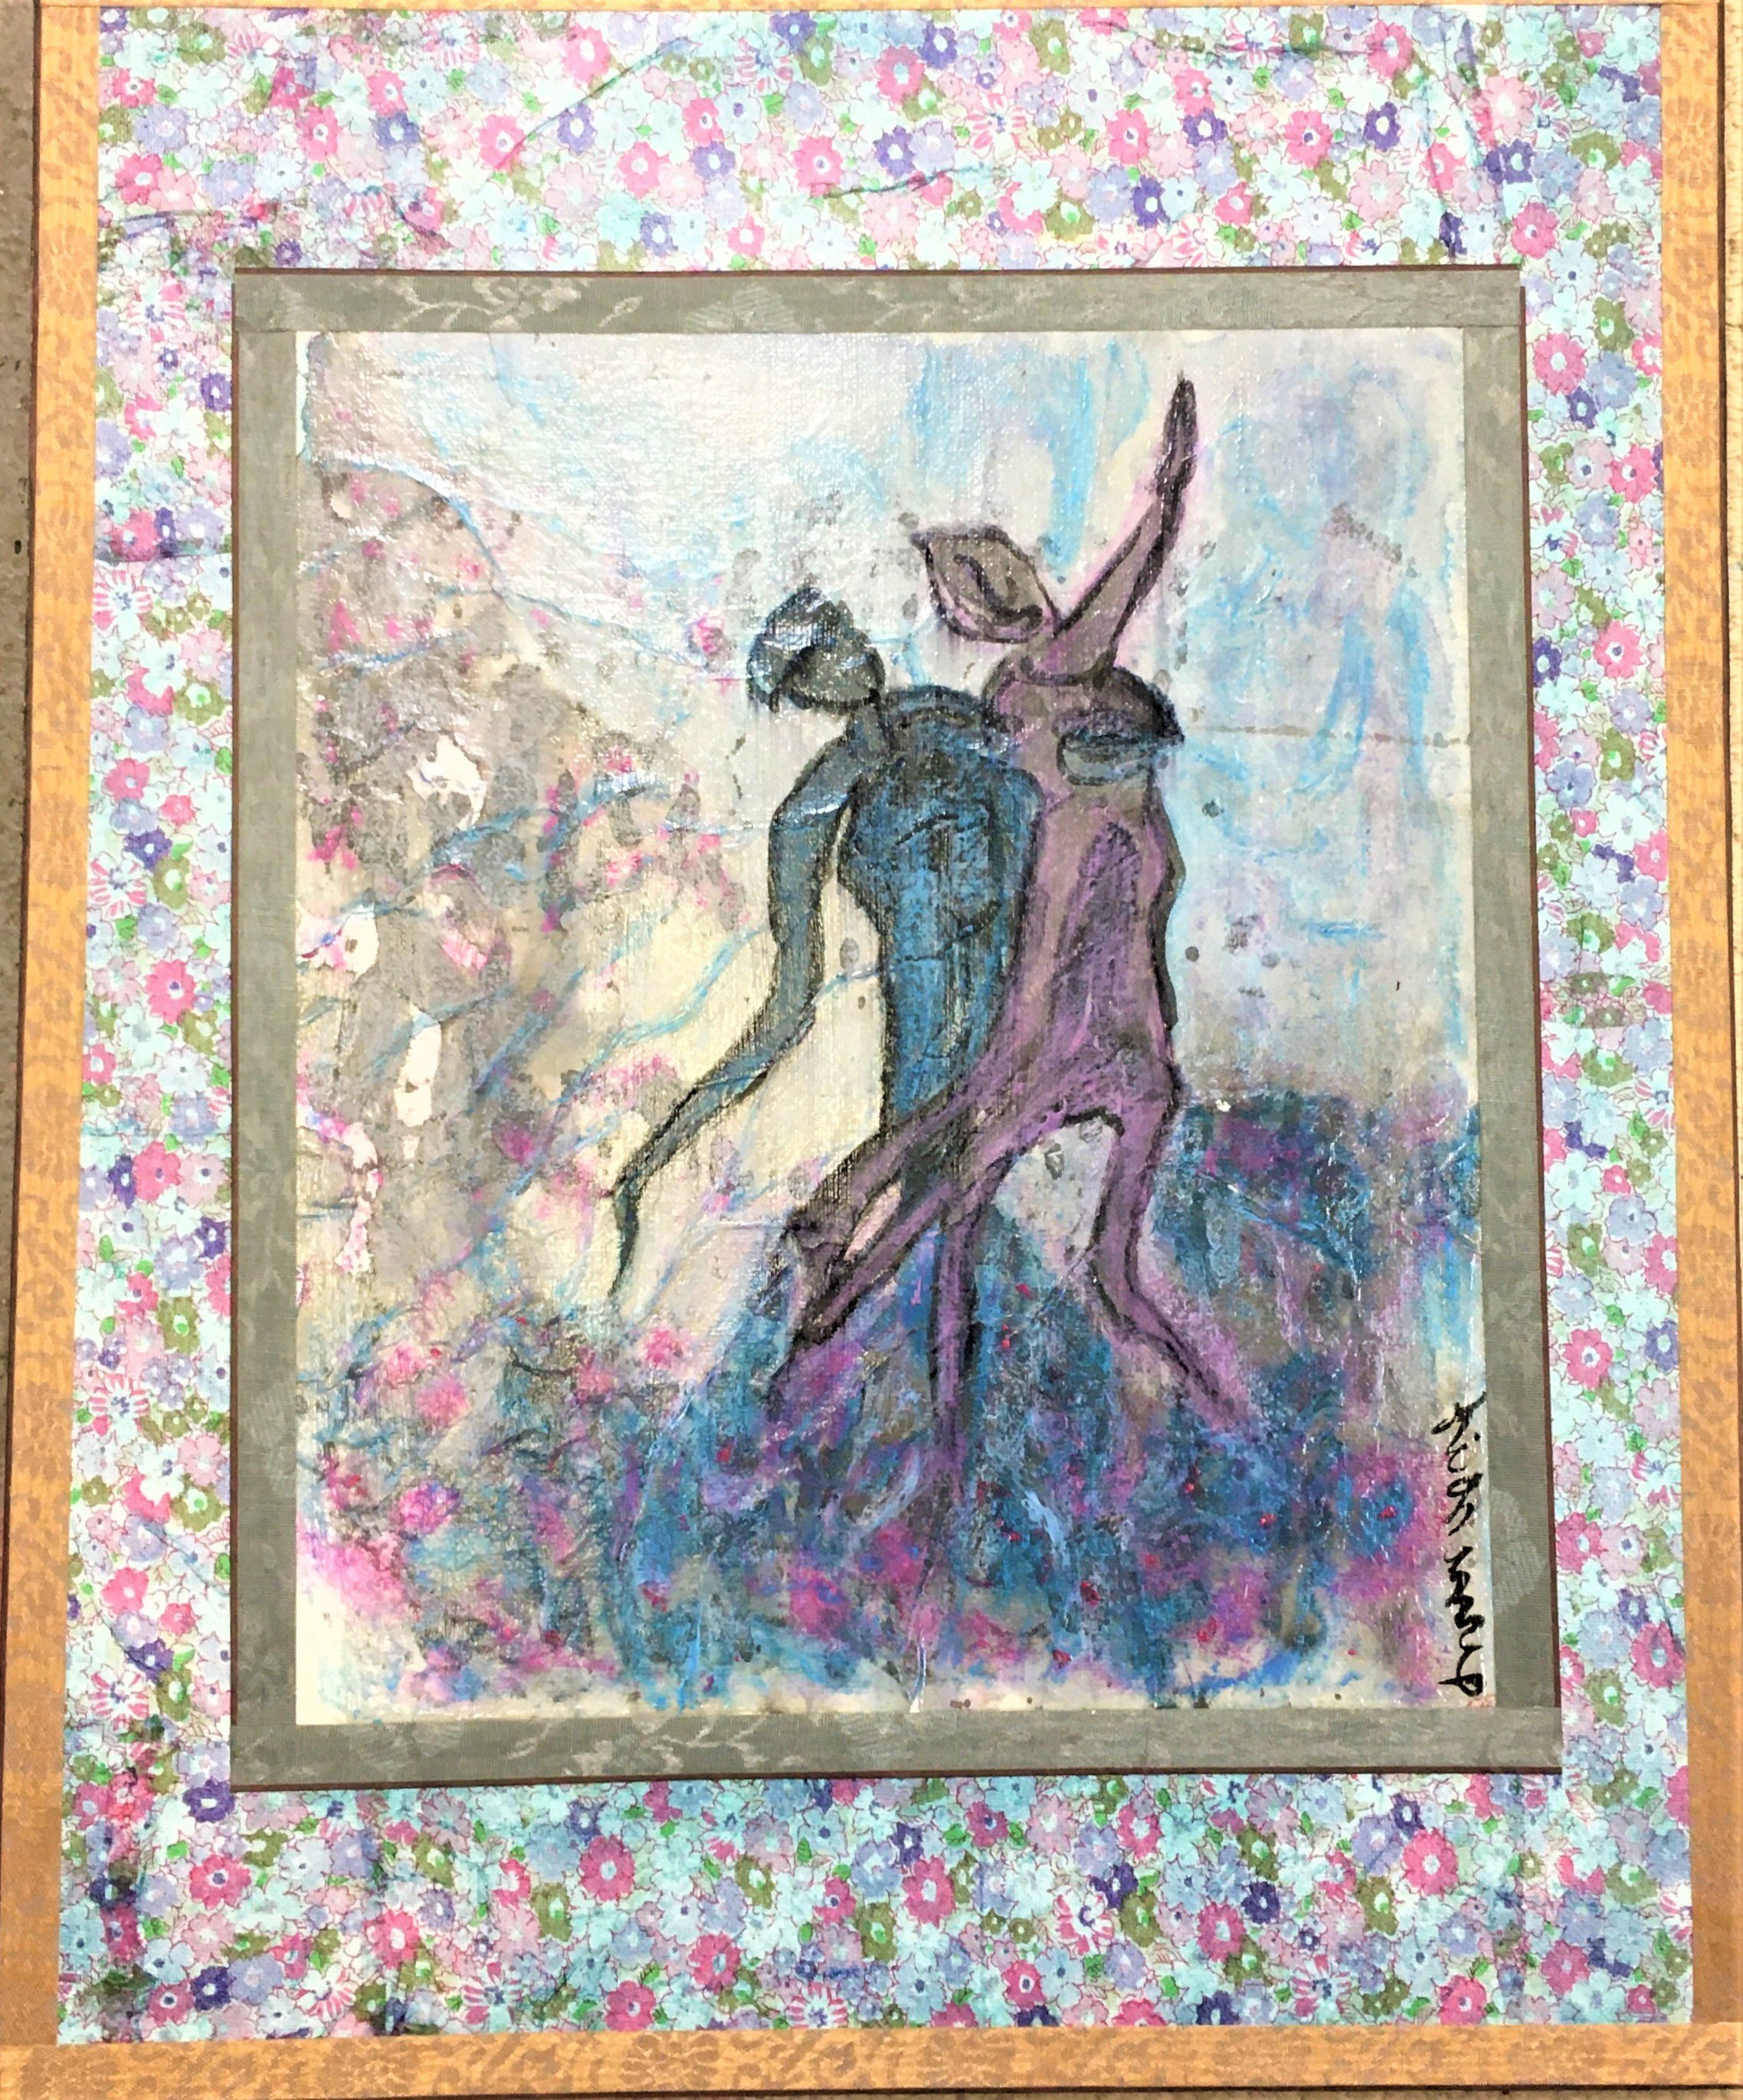 Kichung Lizee: 'dancing couple', 2021 Mixed Media, People. relationship of couple dancing together...